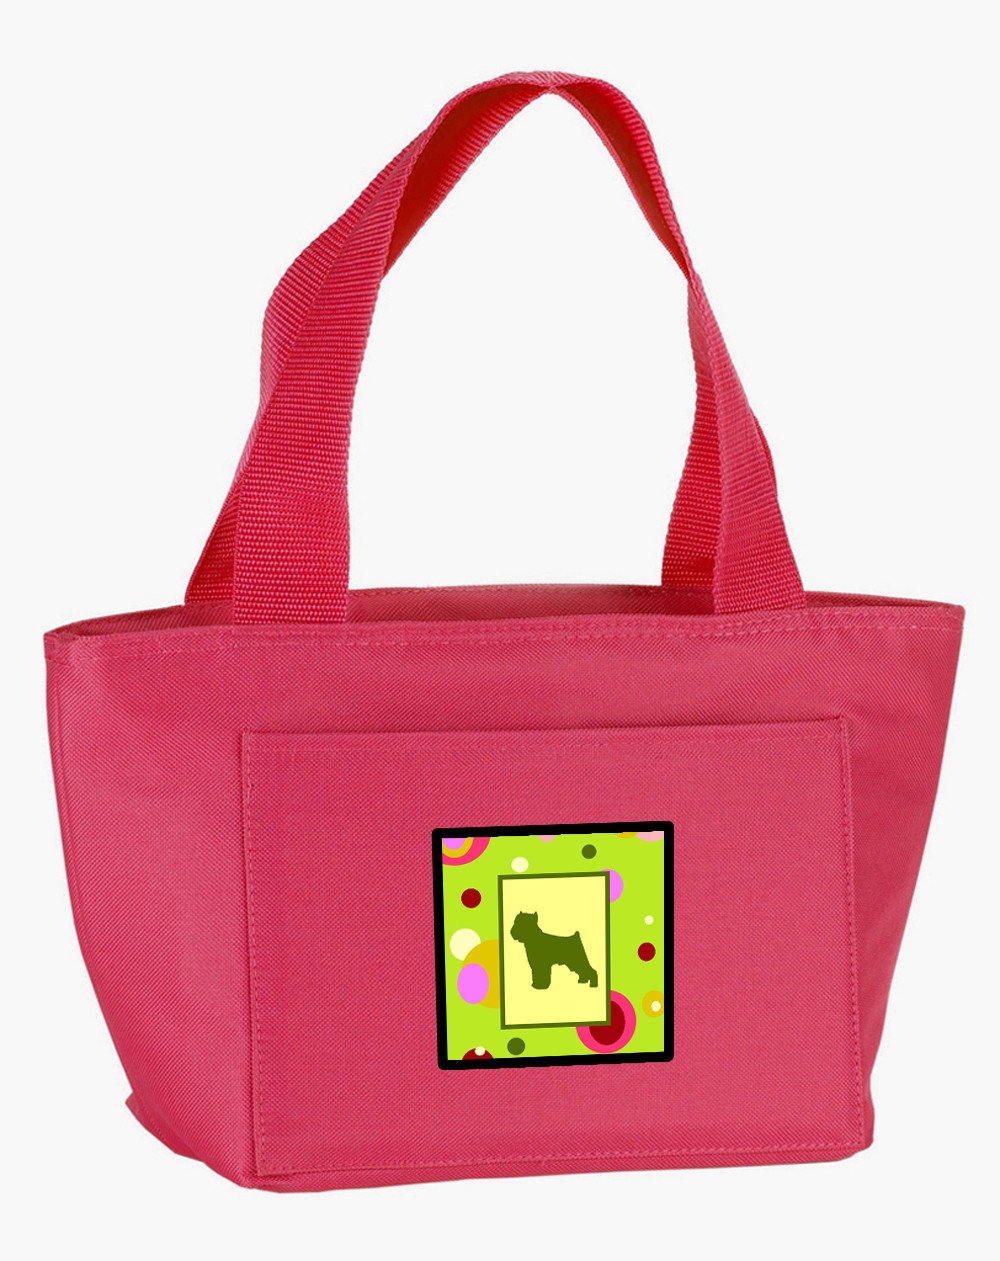 Lime Green Dots Brussels Griffon   Lunch Bag CK1096PK-8808 by Caroline's Treasures